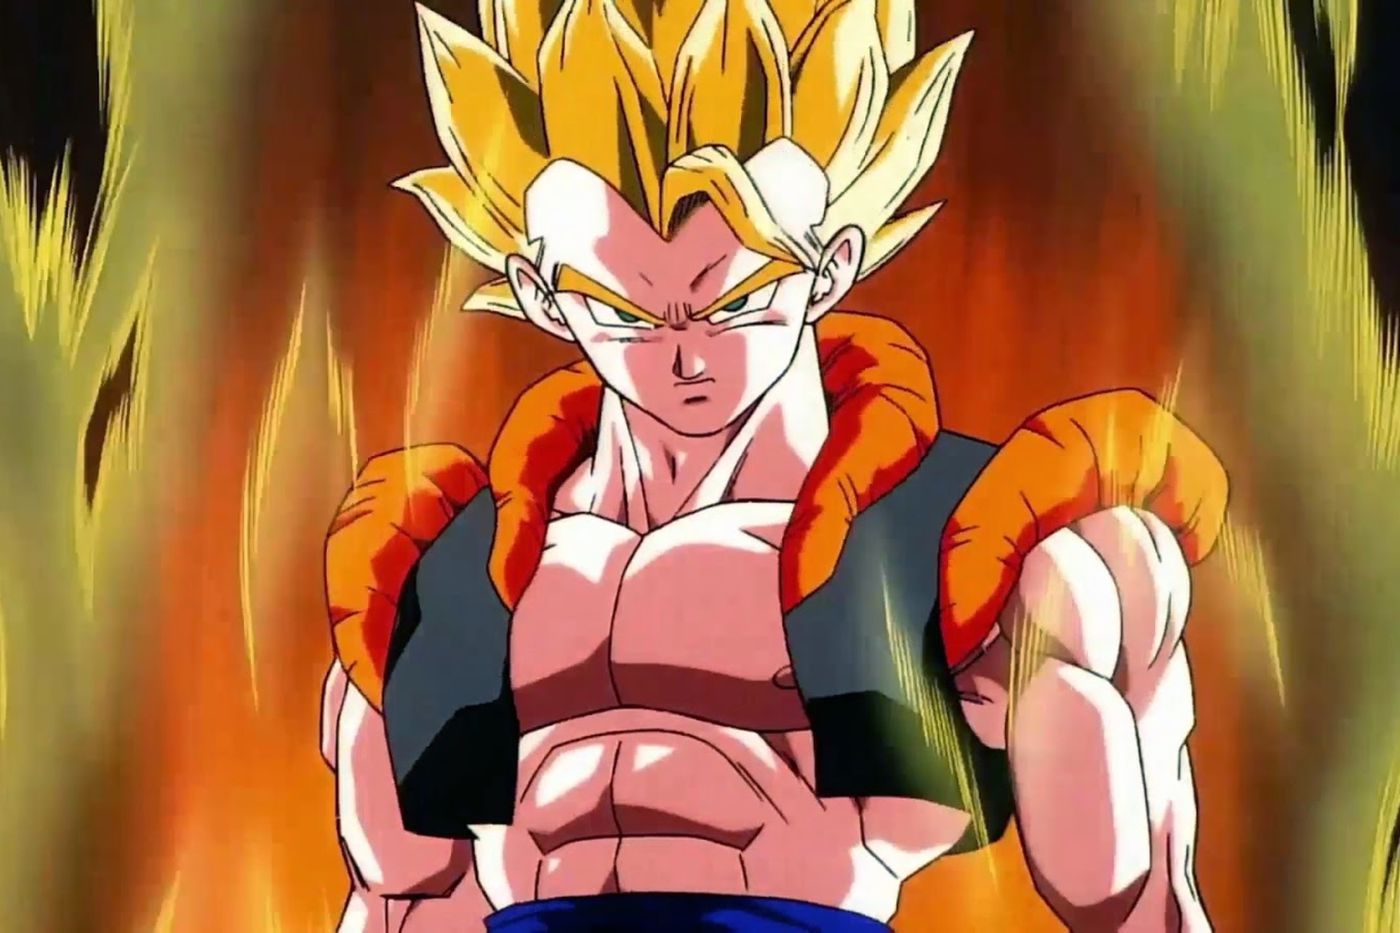 alexis battle recommends dragon ball series torrent pic